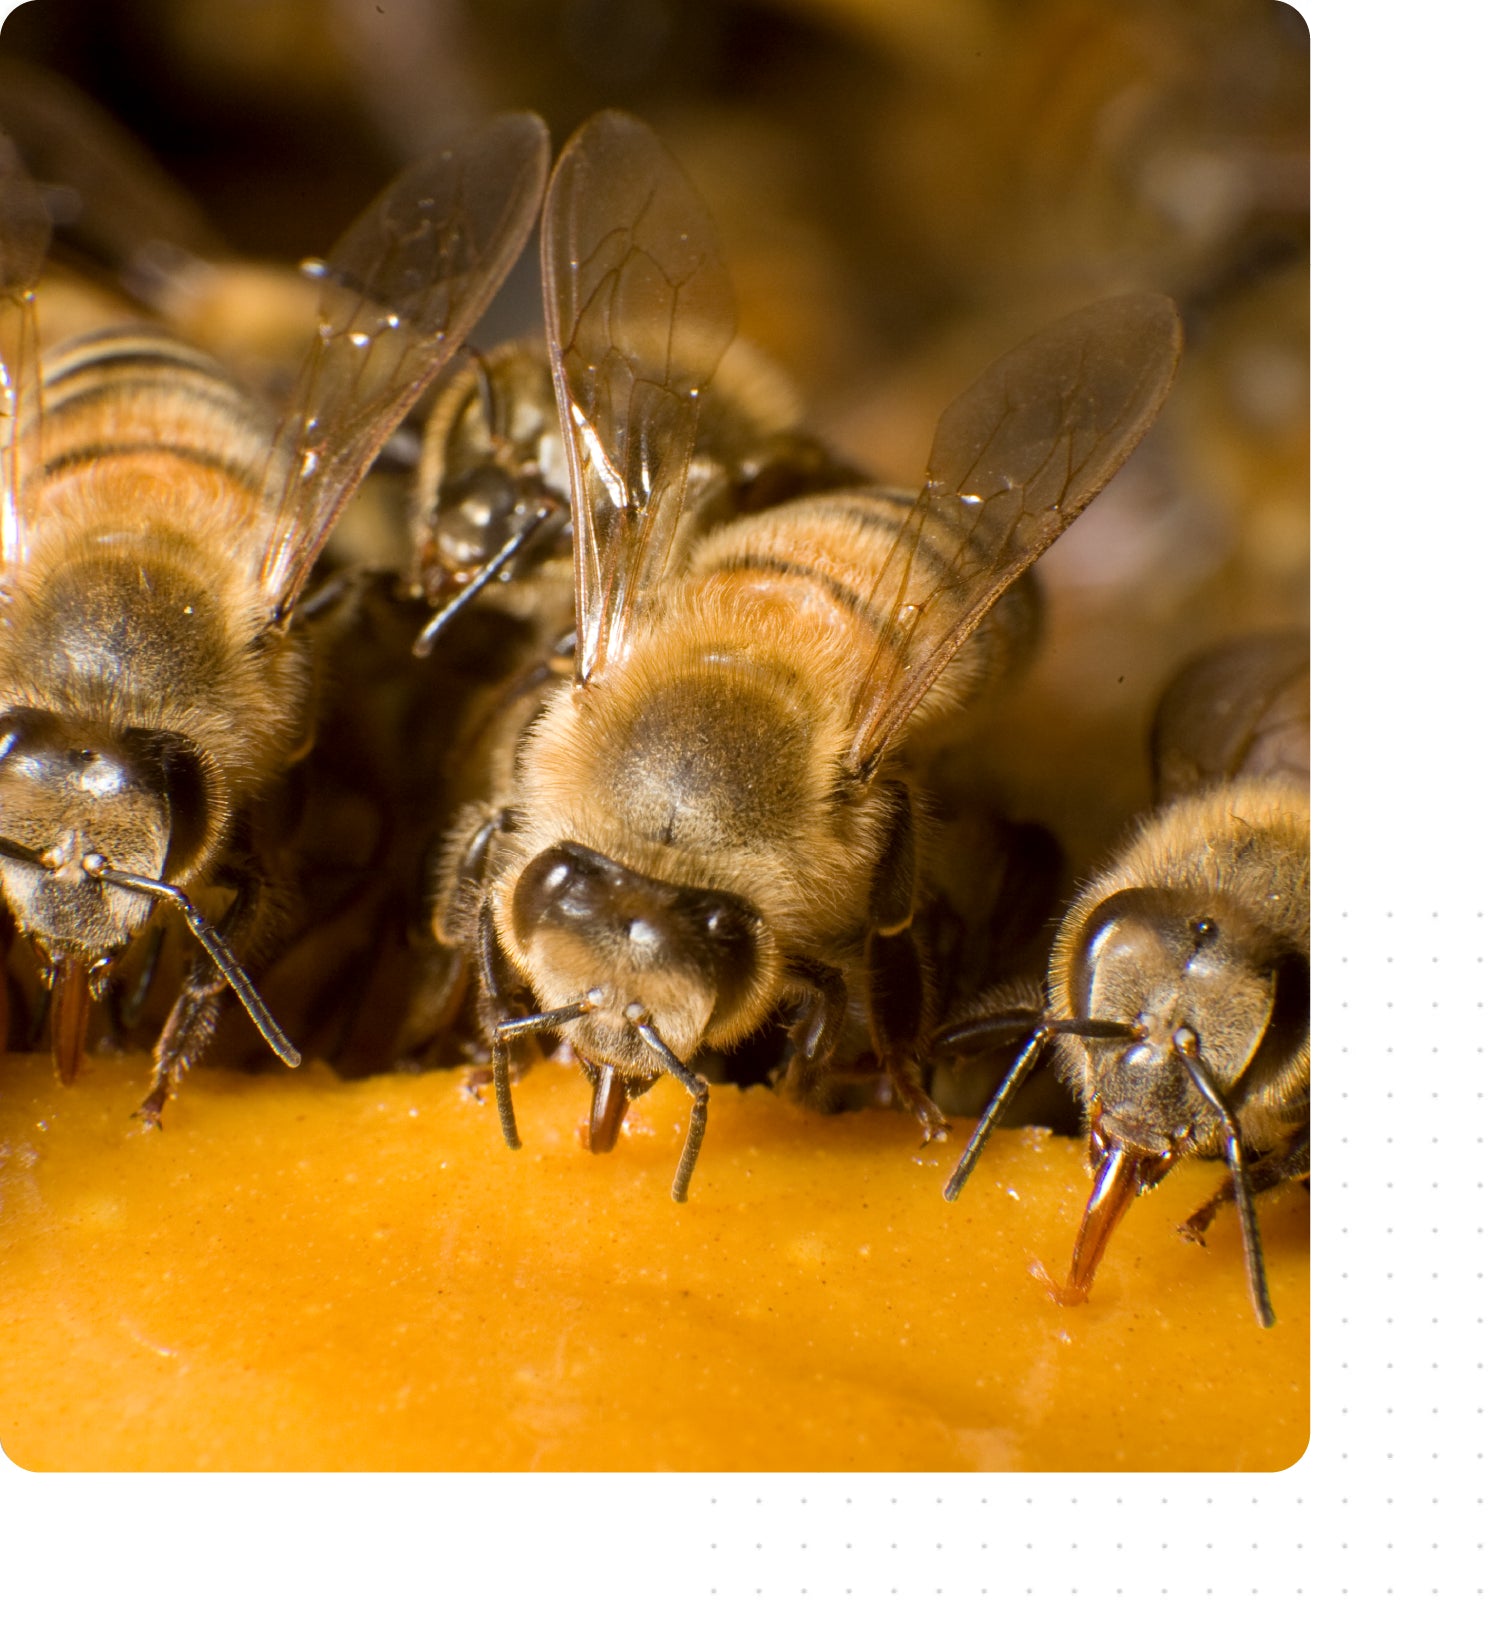 Three bees lined up licking a MegaBee patty